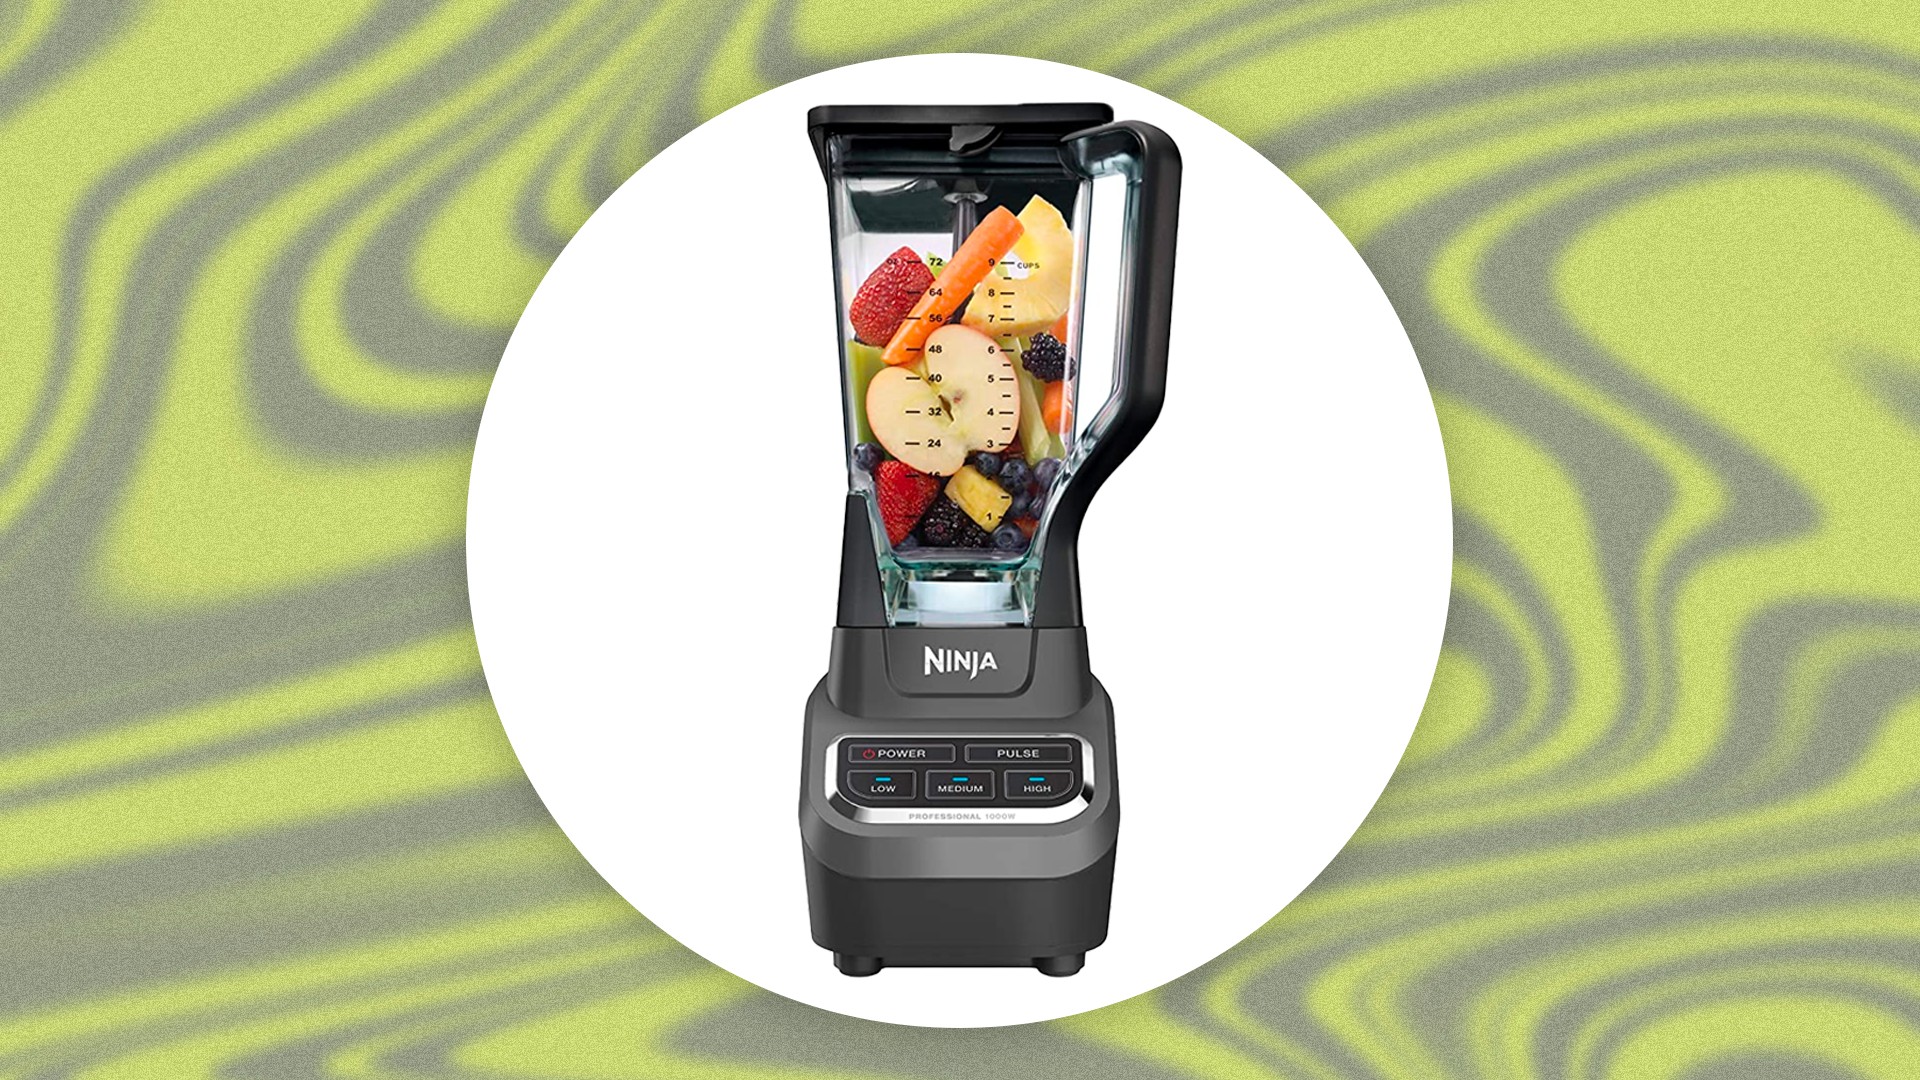 I May Have a Vitamix, but I Use This Ninja Blender Instead